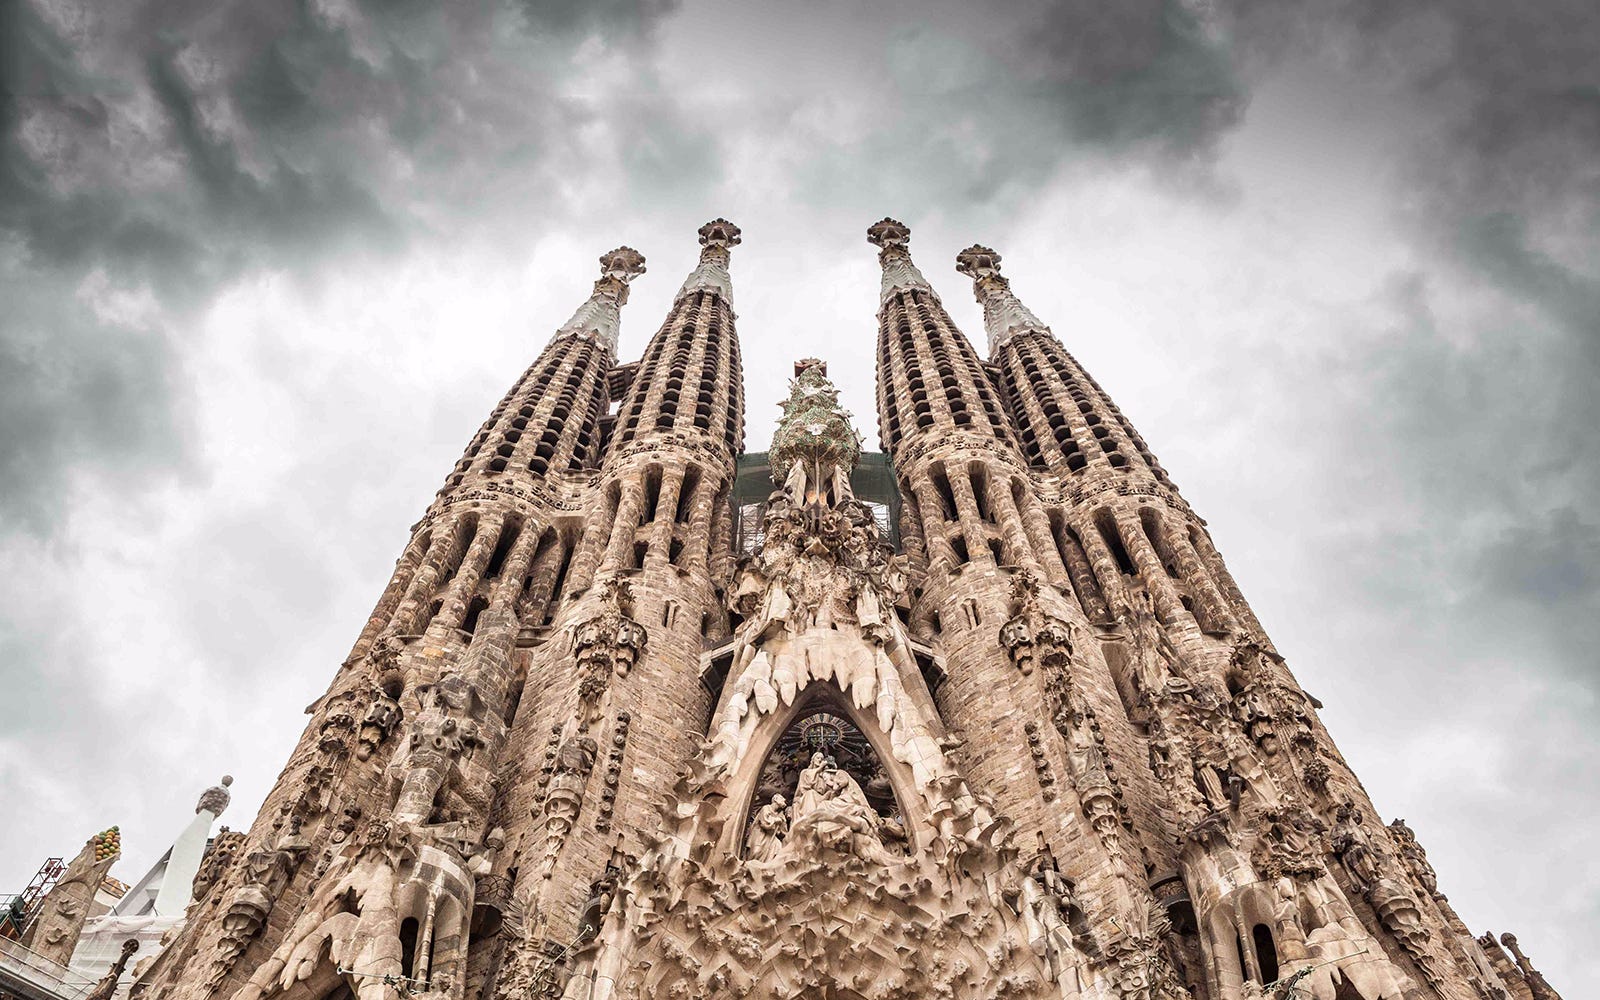 The Sagrada Familia, an intricate totally unique basilica designed entirely by one or two lunatics